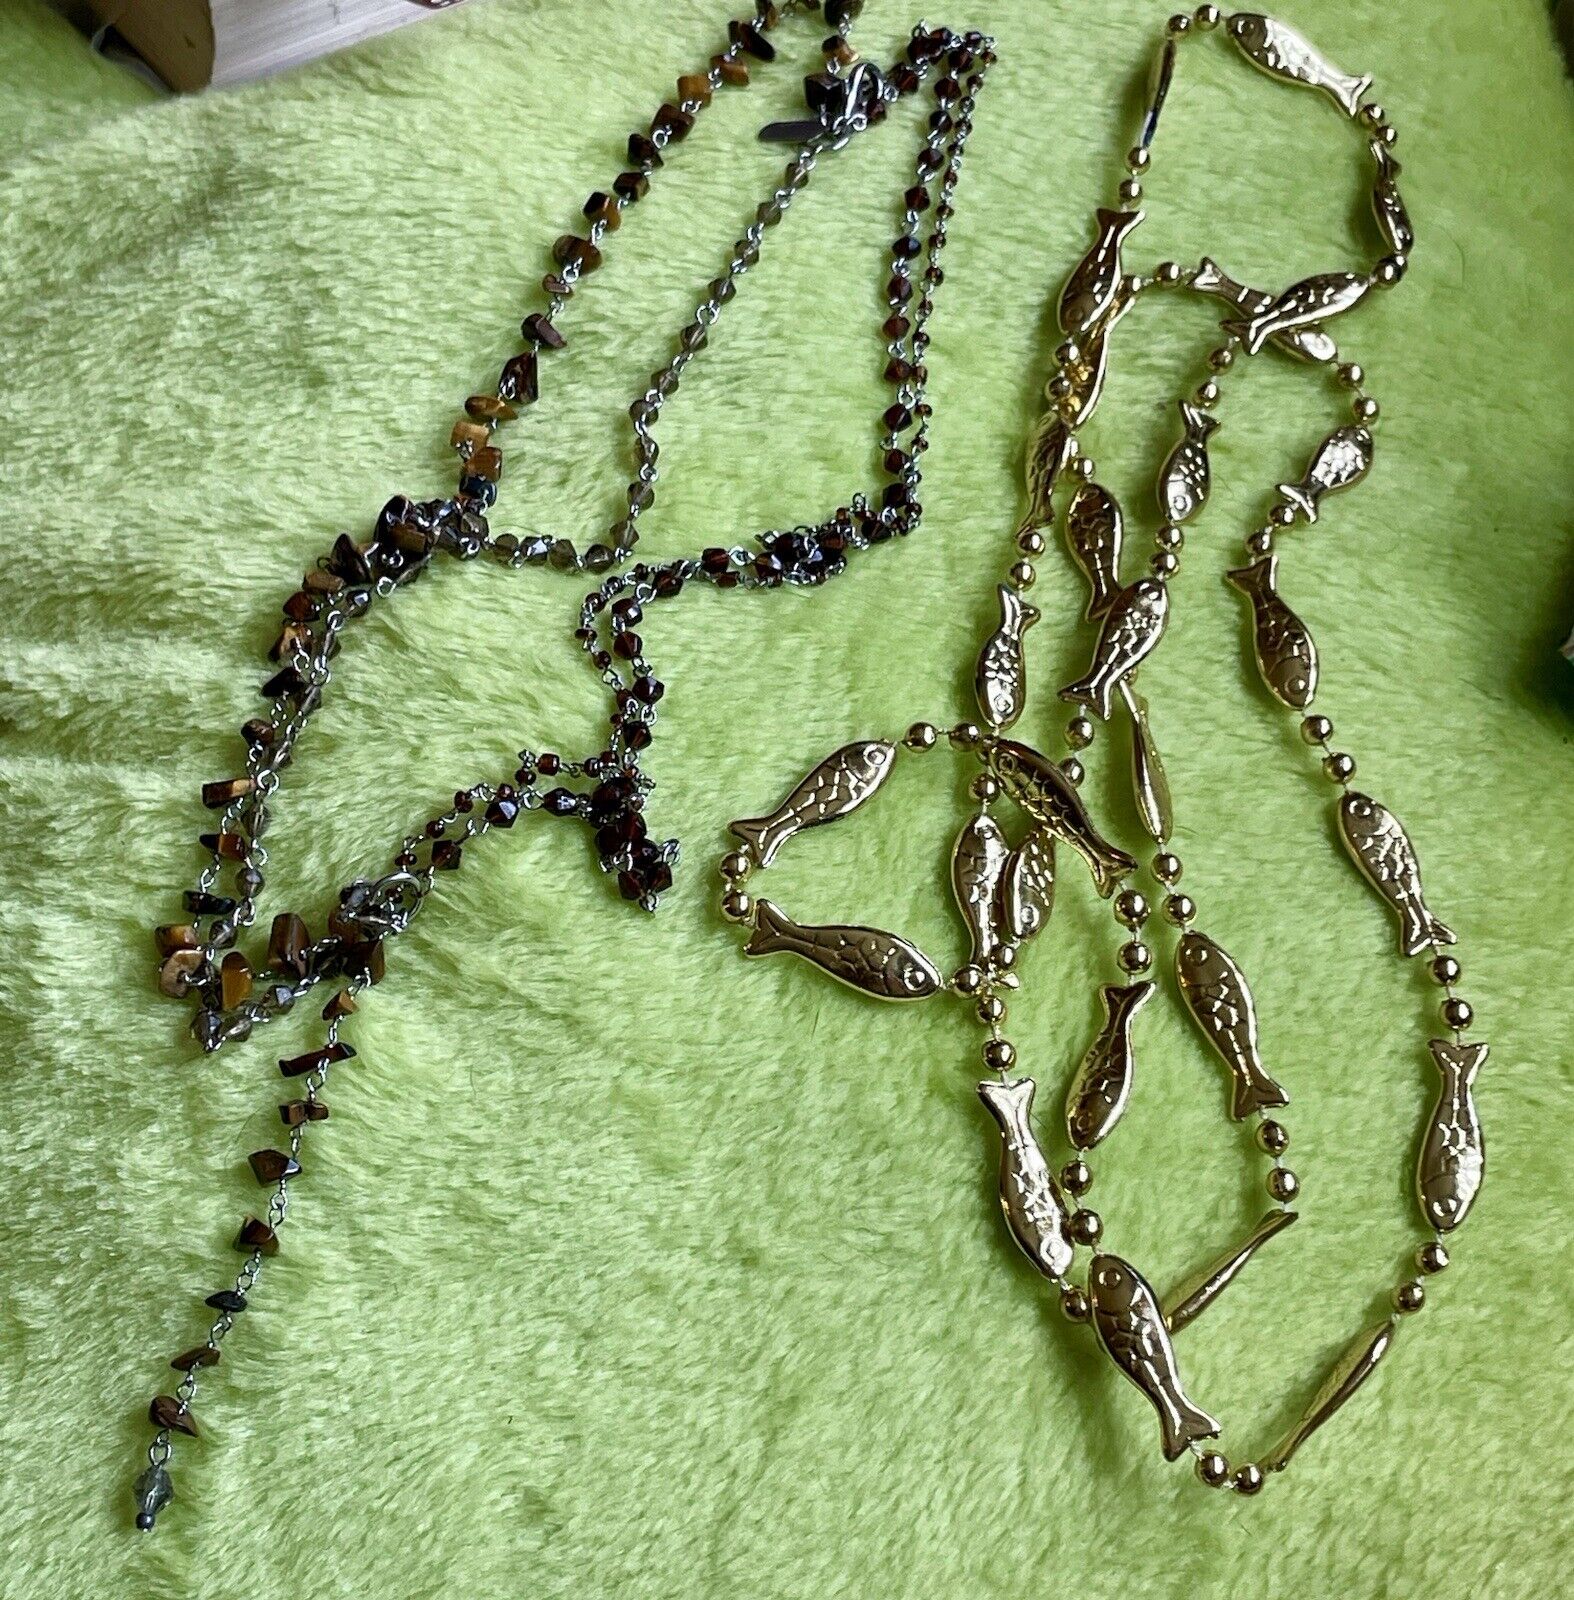 Rosary Beads Necklace Without Mary Charm Or Cross Real 925 Silver Marked Tag